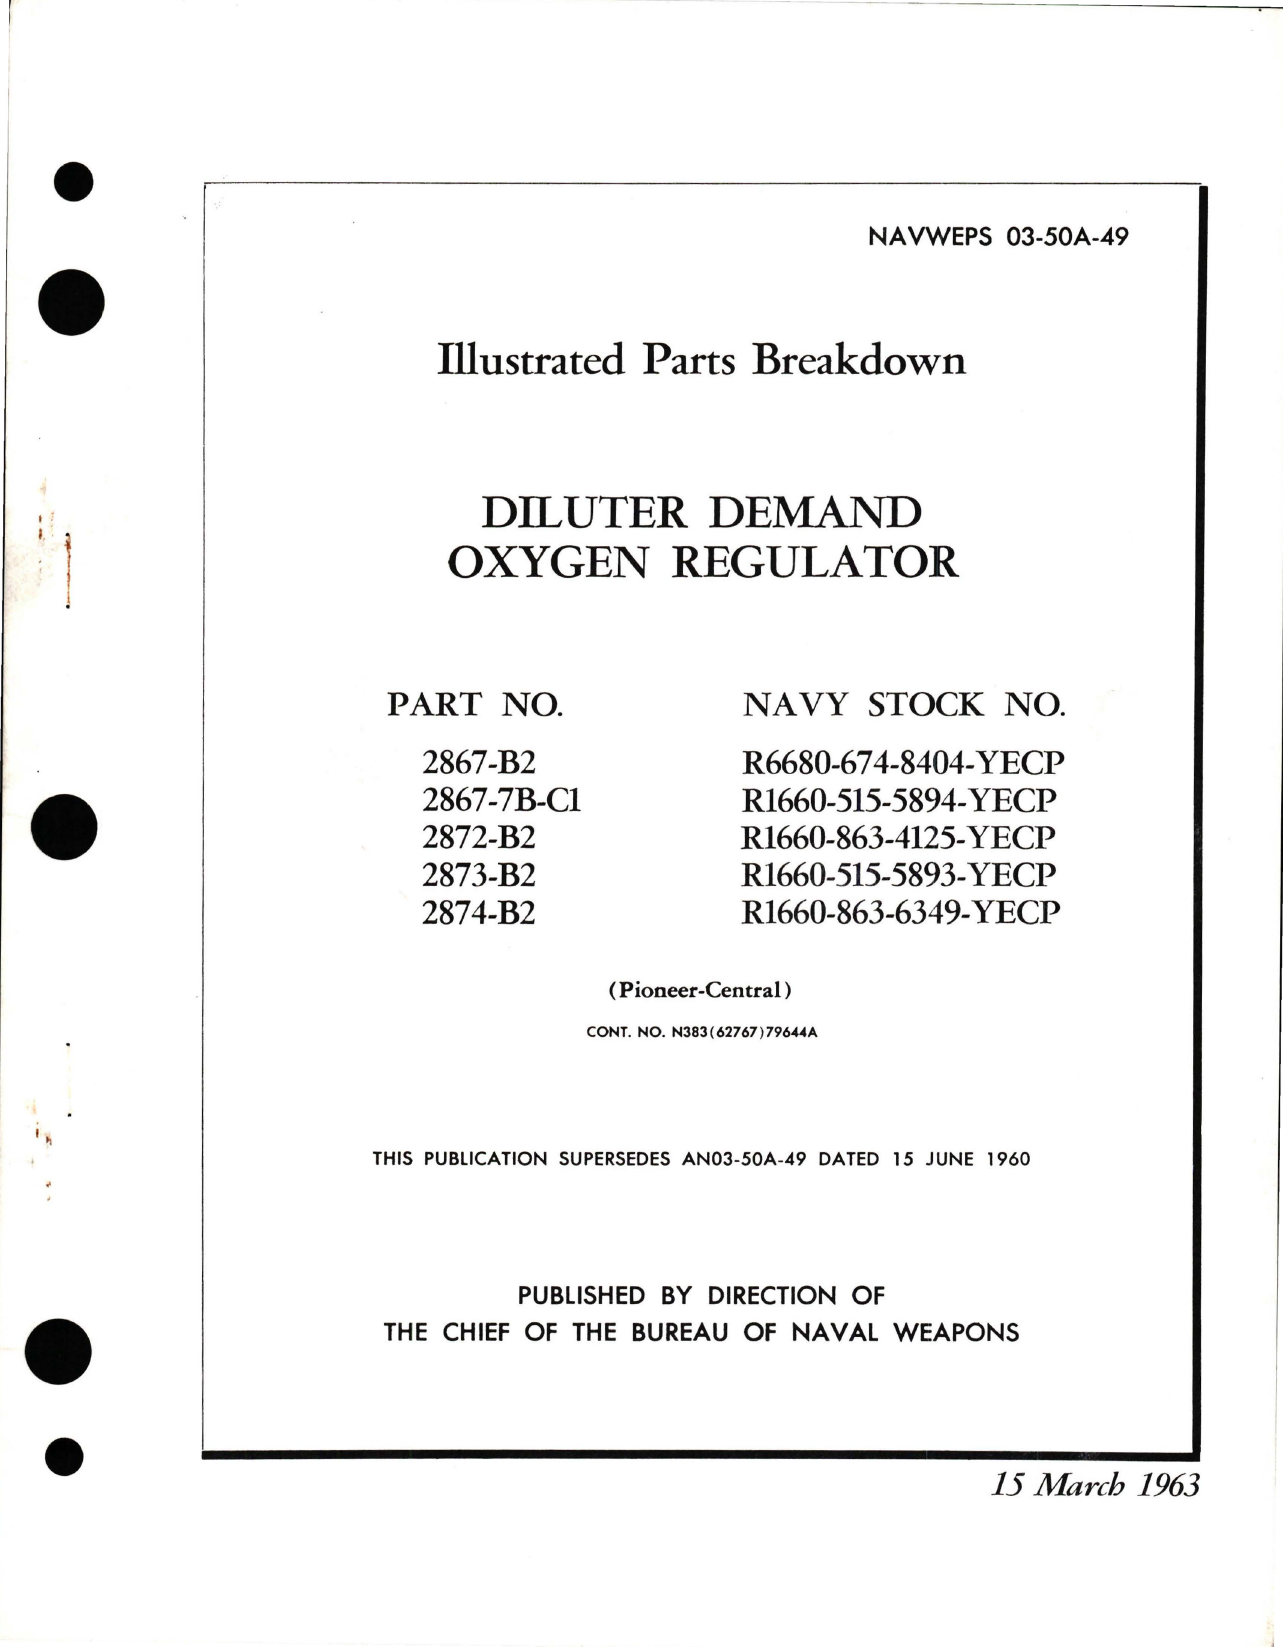 Sample page 1 from AirCorps Library document: Illustrated Parts Breakdown for Diluter Demand Oxygen Regulator - Parts 2867-B2, 2867-7B-C1, 2872-B2, 2873-B2, and 2874-B2